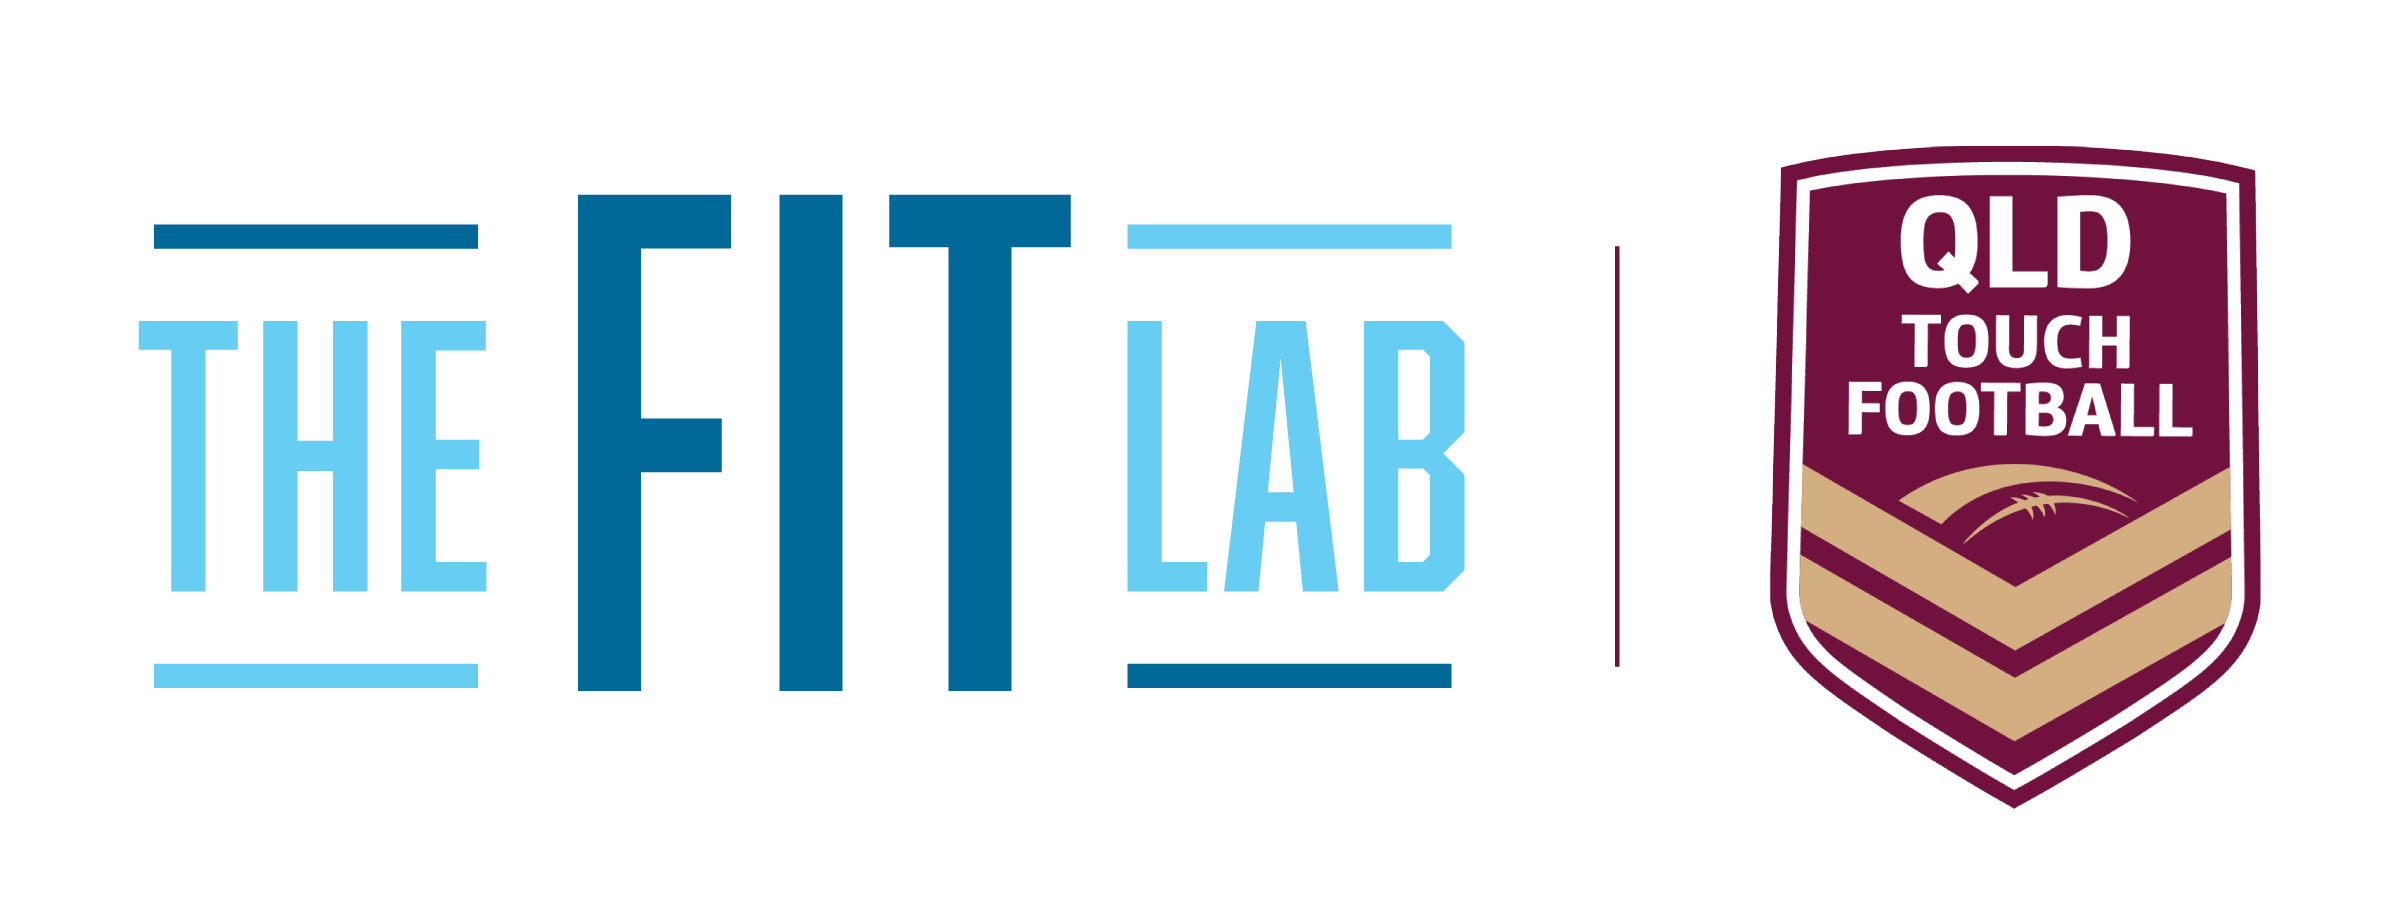 The Fit Lab - QLD Touch Football (QTF) Partnership